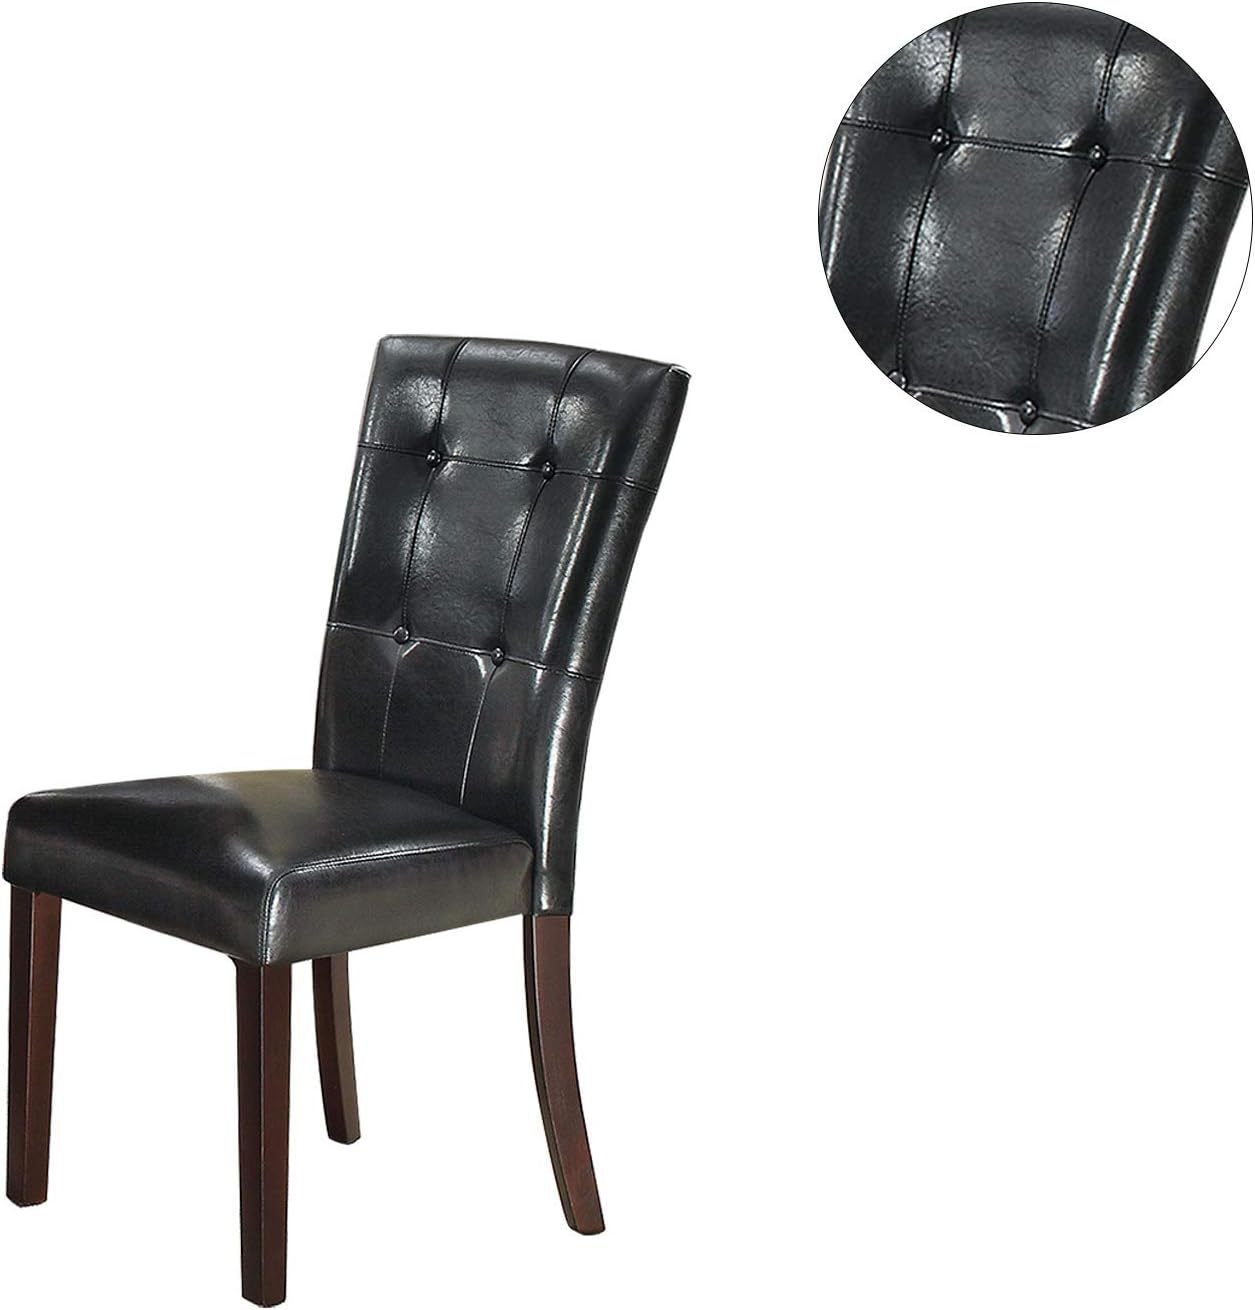 Modern Parson Chairs Black Faux Leather Tufted Set of 2 Side Chairs Dining Seatings